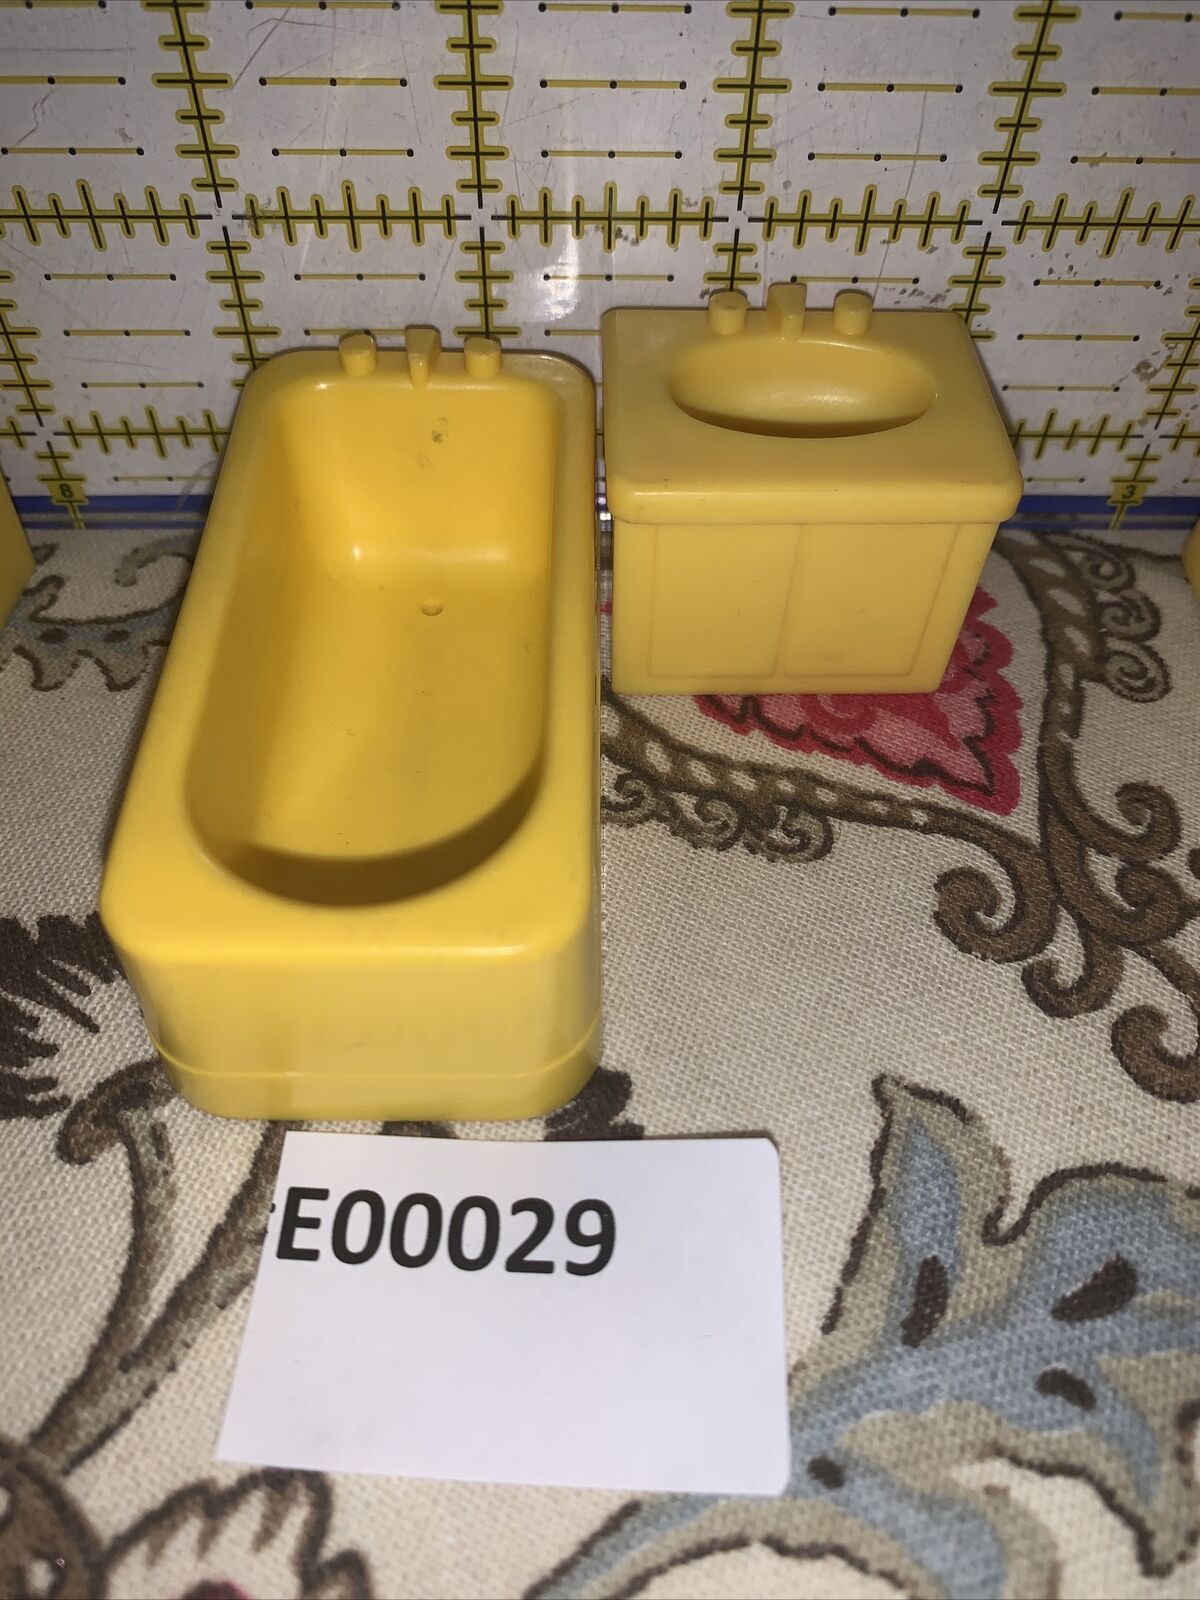 Fisher Price Little People Vintage Tub Sink Furniture Yellow E00029